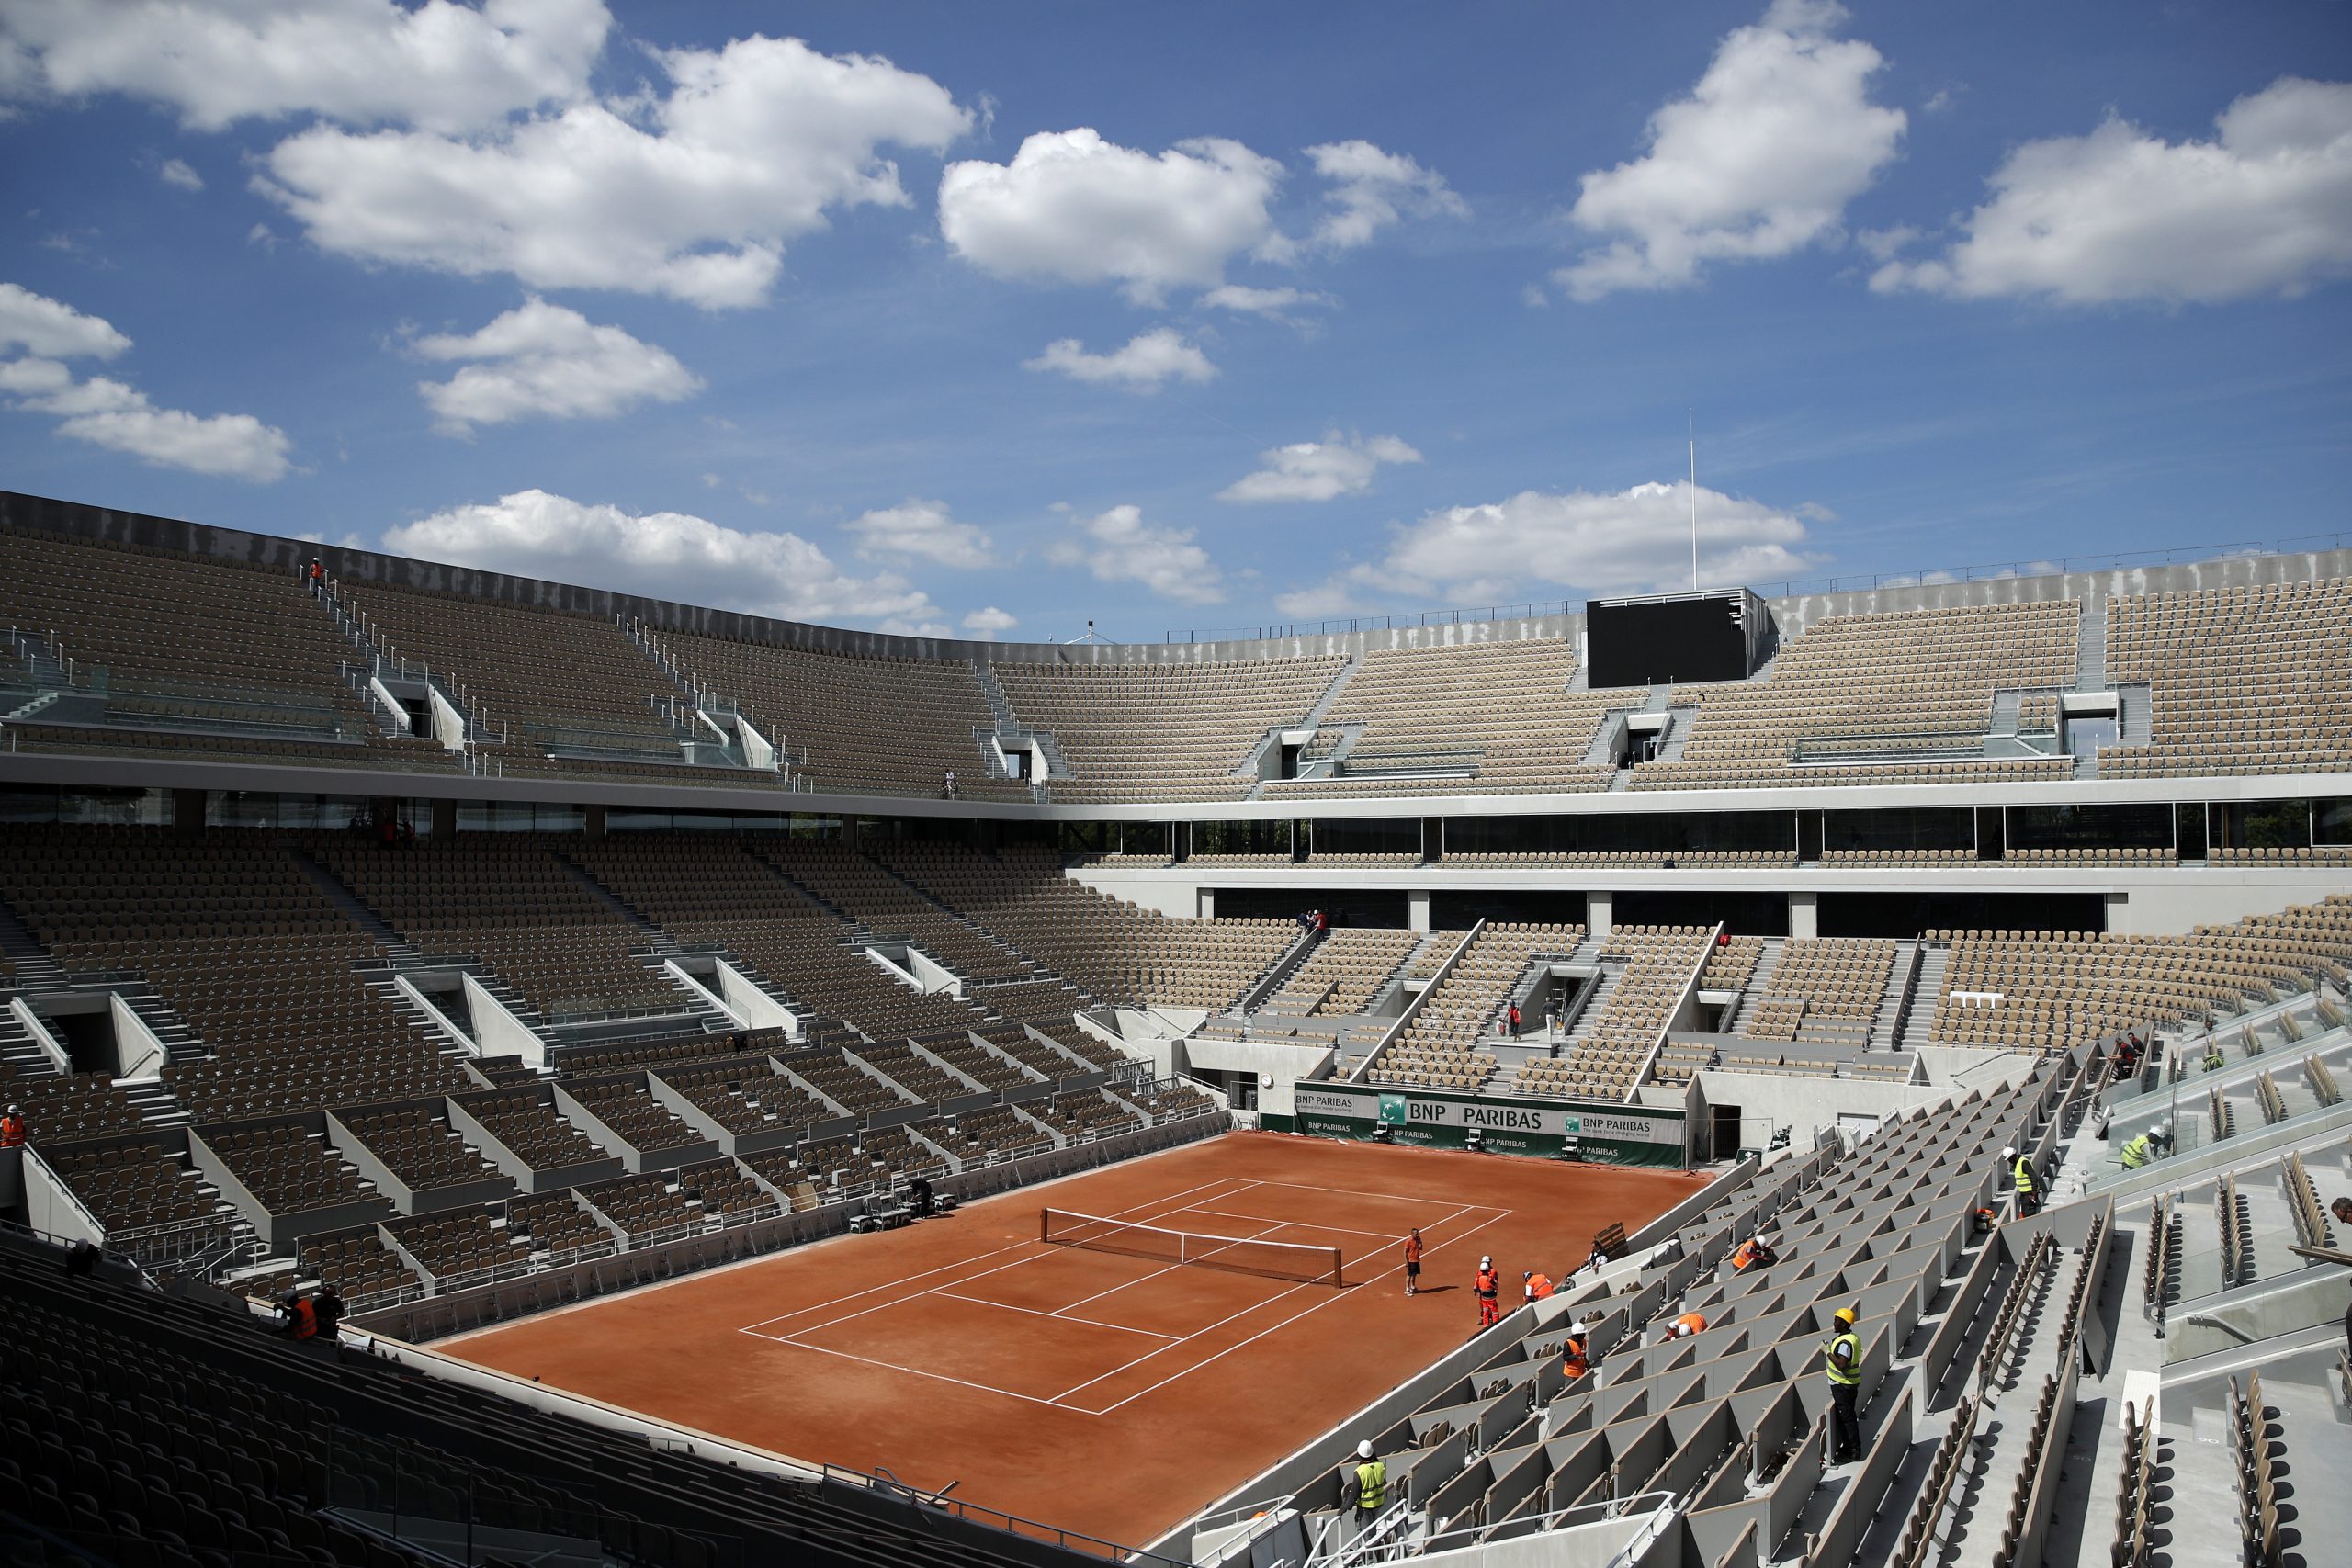 epa08413400 (FILE) - General view of the new Central court at Roland Garros in Paris, France, 16 May 2019. The French Open tennis tournament at Roland Garros in Paris will run from 26 May to 09 June 2019, re-issued 10 May 2020. The organisers of the French Open no longer rule out the possibility of holding the most important clay court tournament on the tennis calendar without spectators. "Organising the tournament behind closed doors would allow part of the business model, the servicing of the television rights, to take place. This should not be overlooked," said Bernard Giudicelli, President of the French Tennis Federation FFT. Most recently, France's Minister of Sport, Roxana Maracineanu, clearly rejected the idea of holding the Grand Slam tournament without spectators.  EPA/YOAN VALAT *** Local Caption *** 55198323